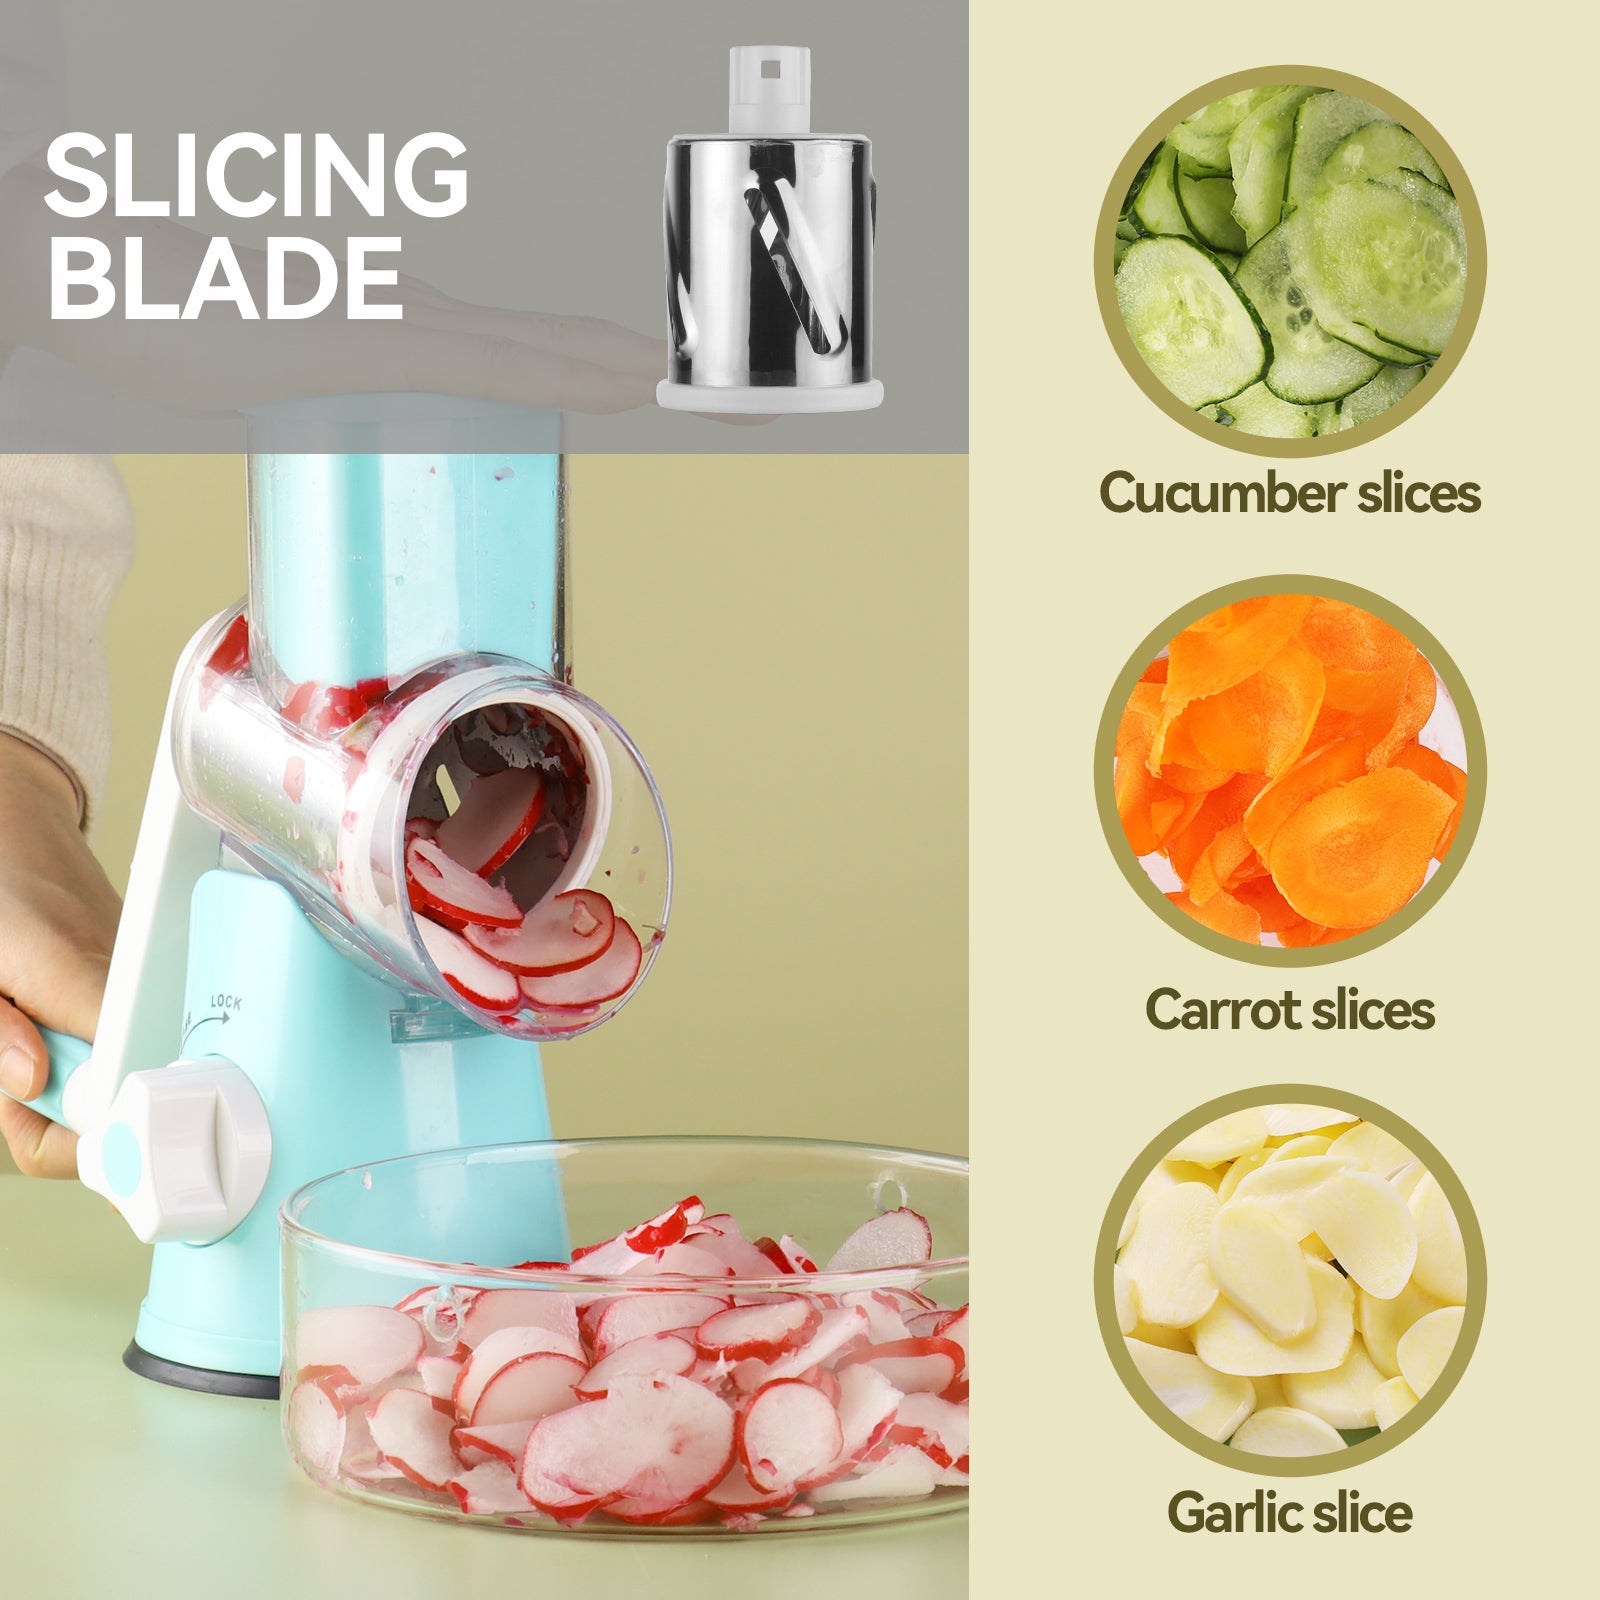 Vegetable Drum Slicer and Vegetable Cutter with 3 Stainless Steel Blades 